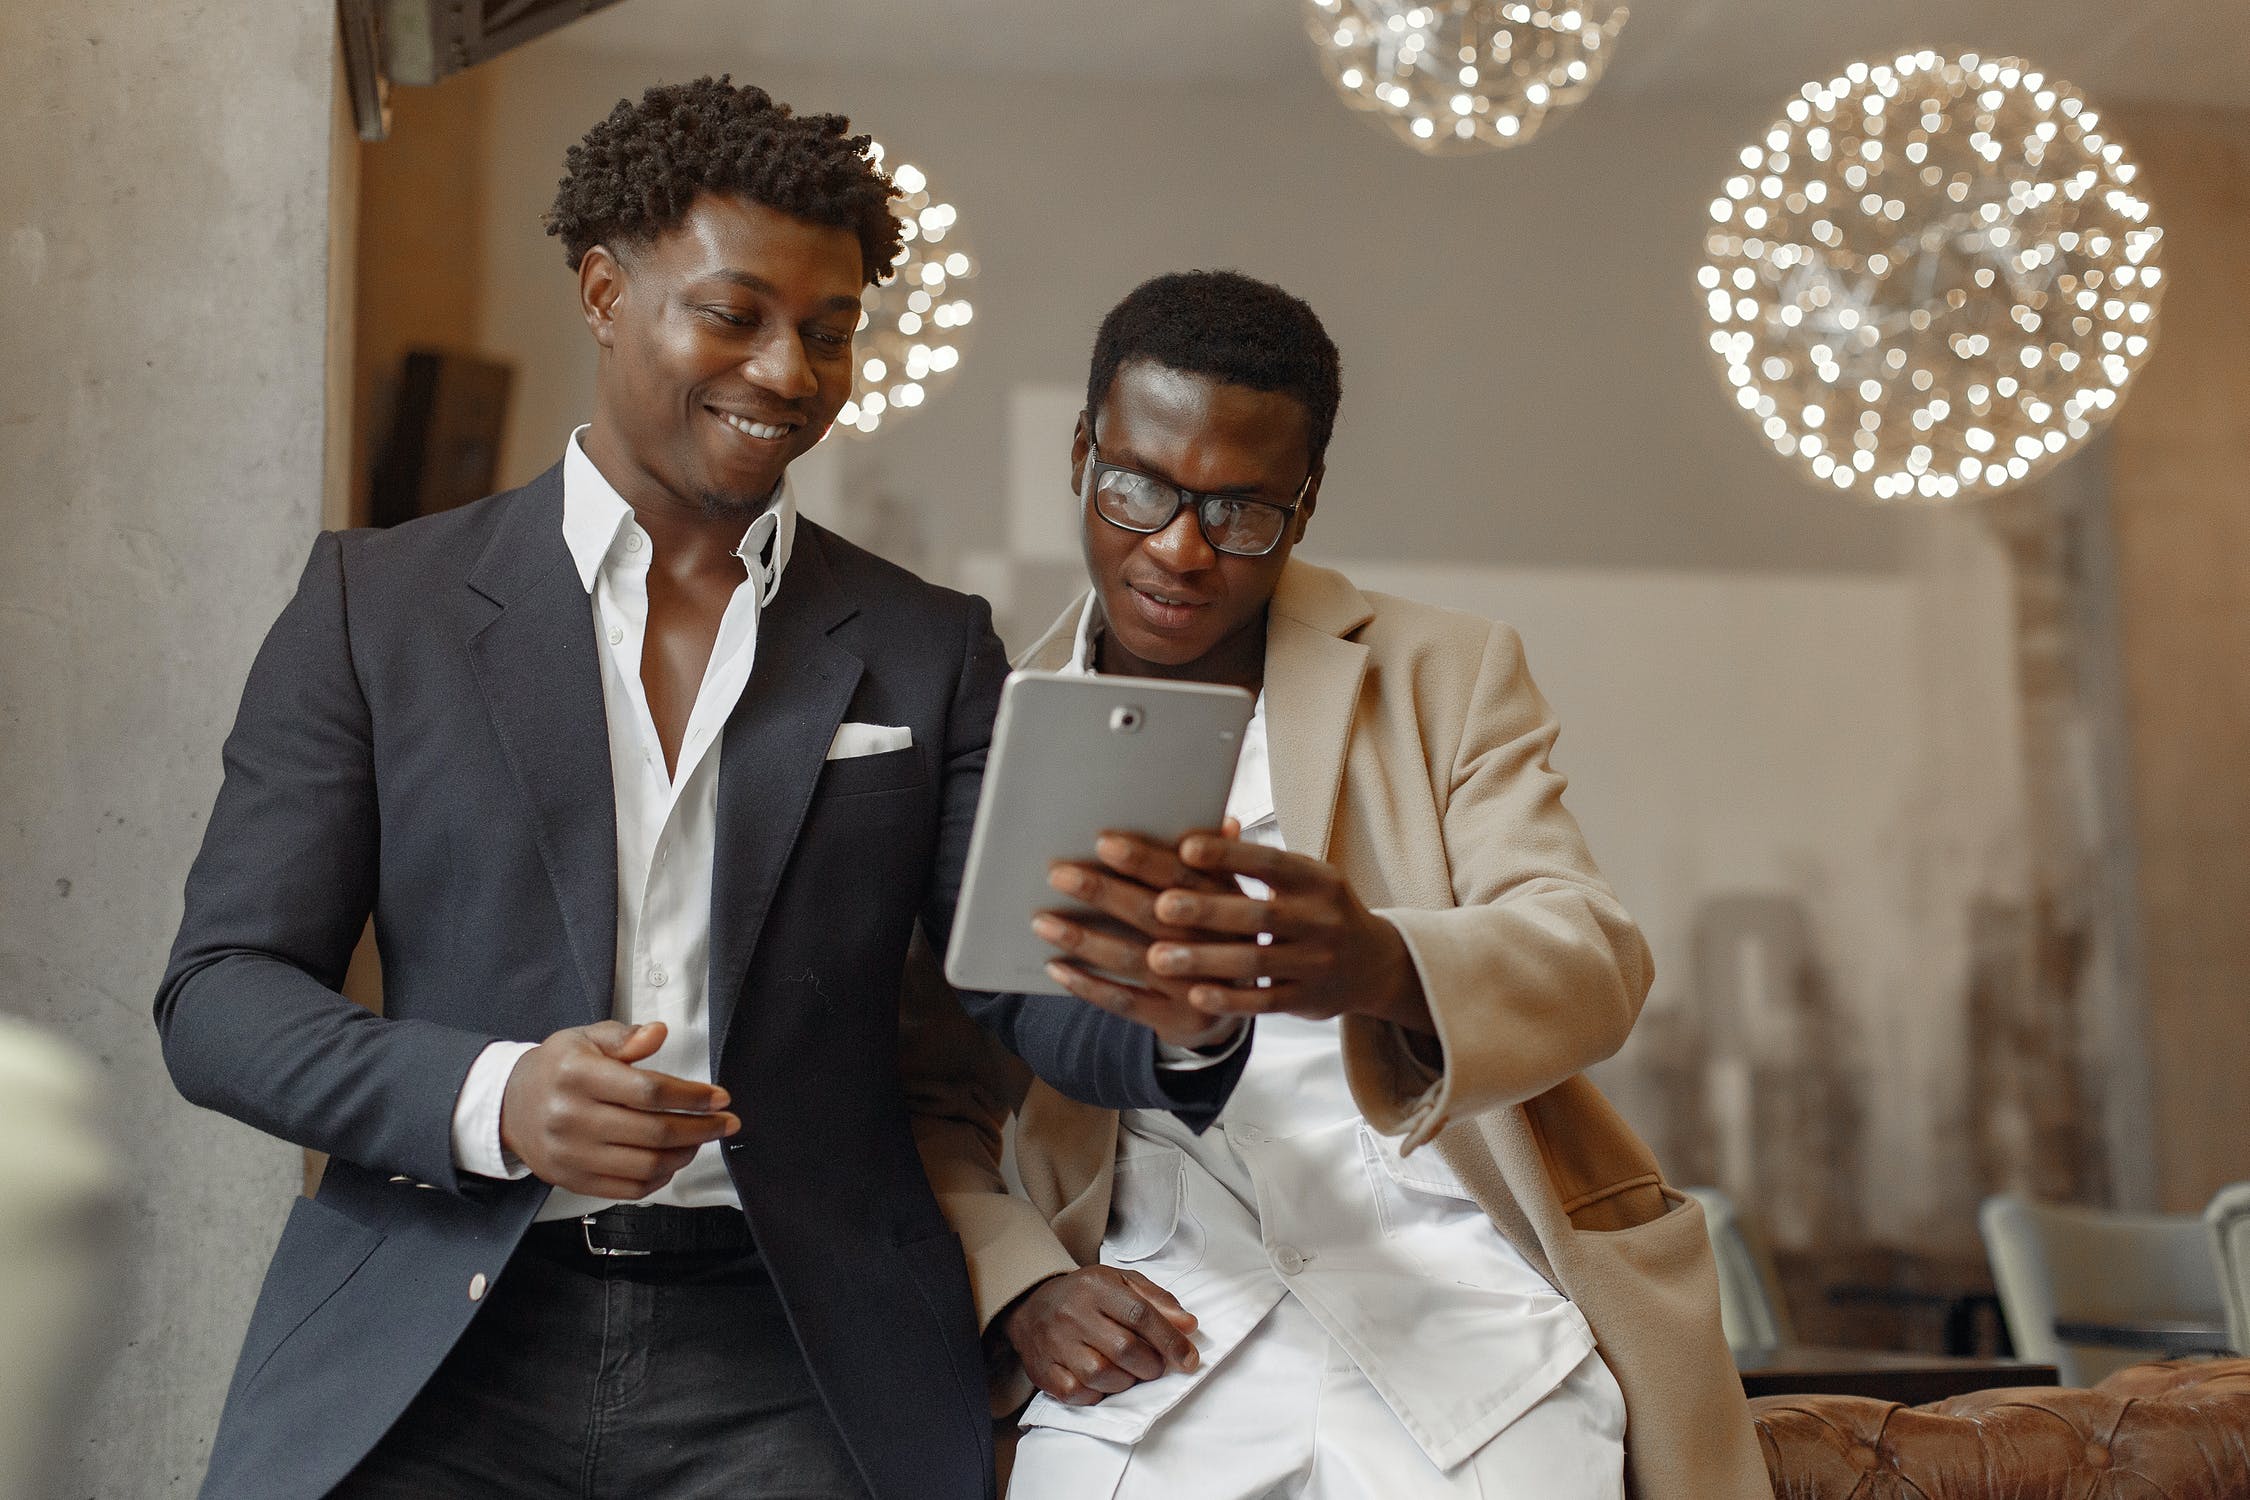 Two men in suits looking at a tablet